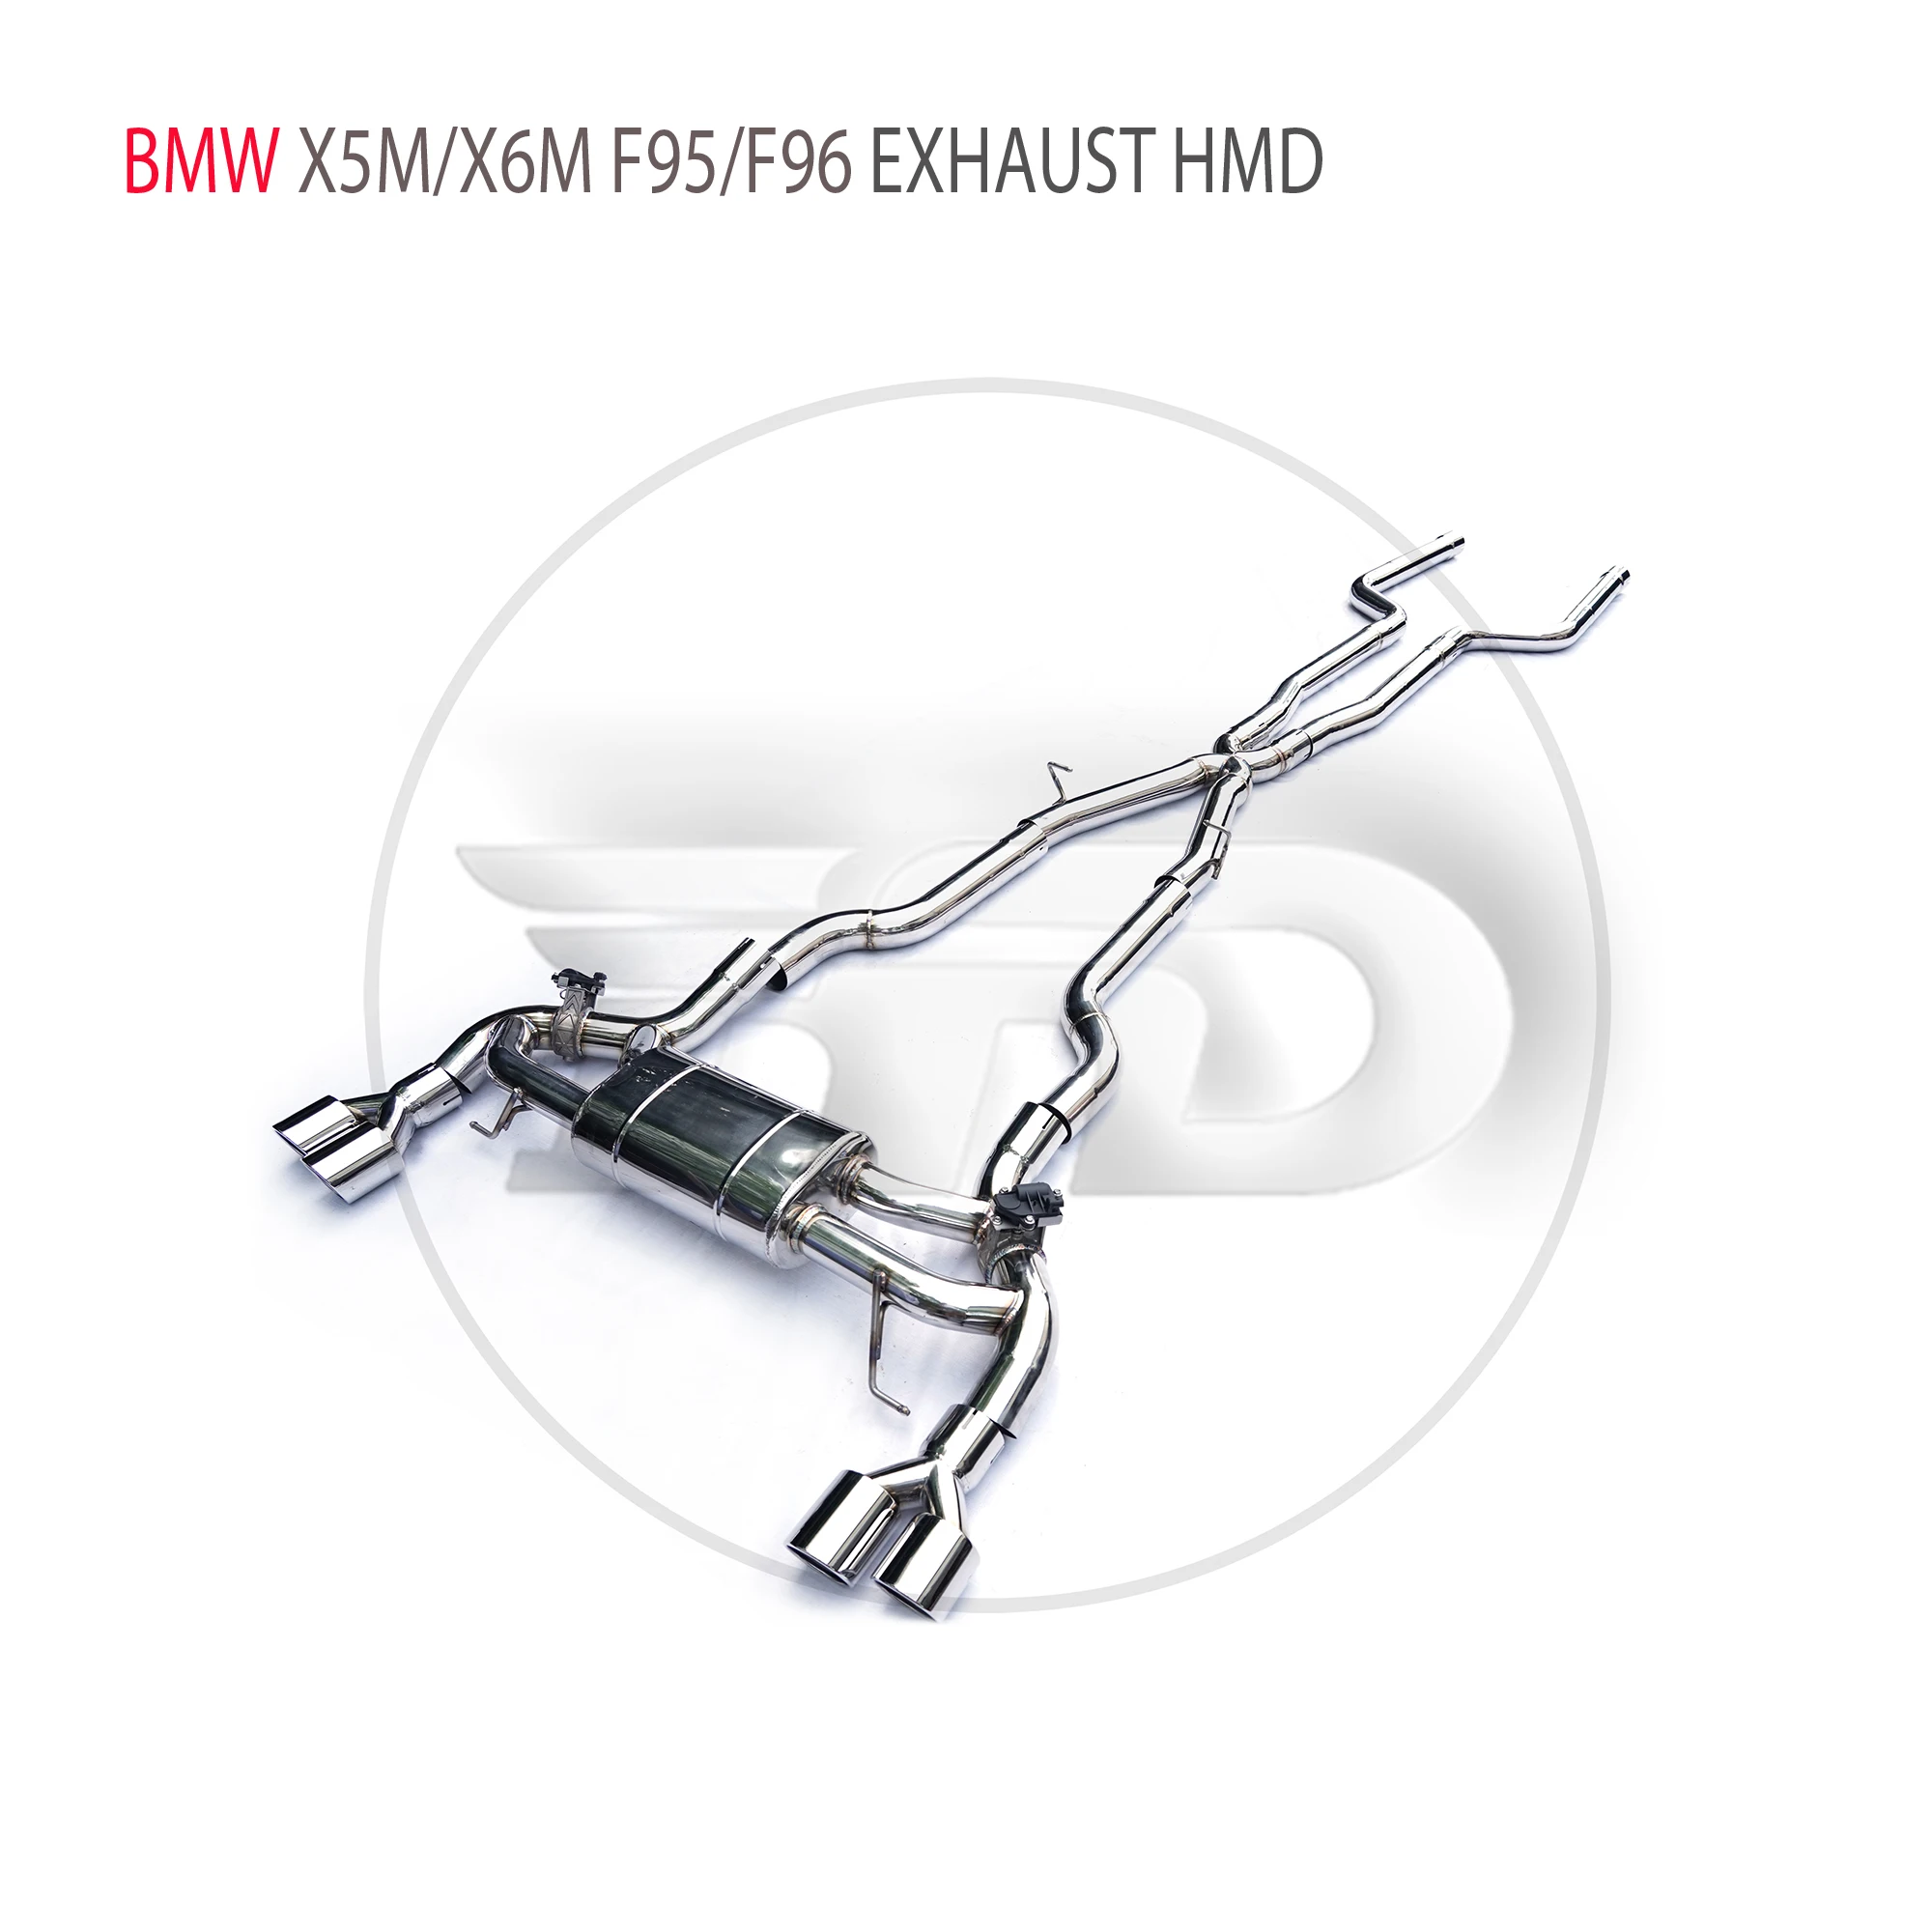 

HMD Stainless Steel Exhaust System Performance Catback for BMW X5M X6M F95 F96 4.4T S63 Engine 2019+ Valve Muffler